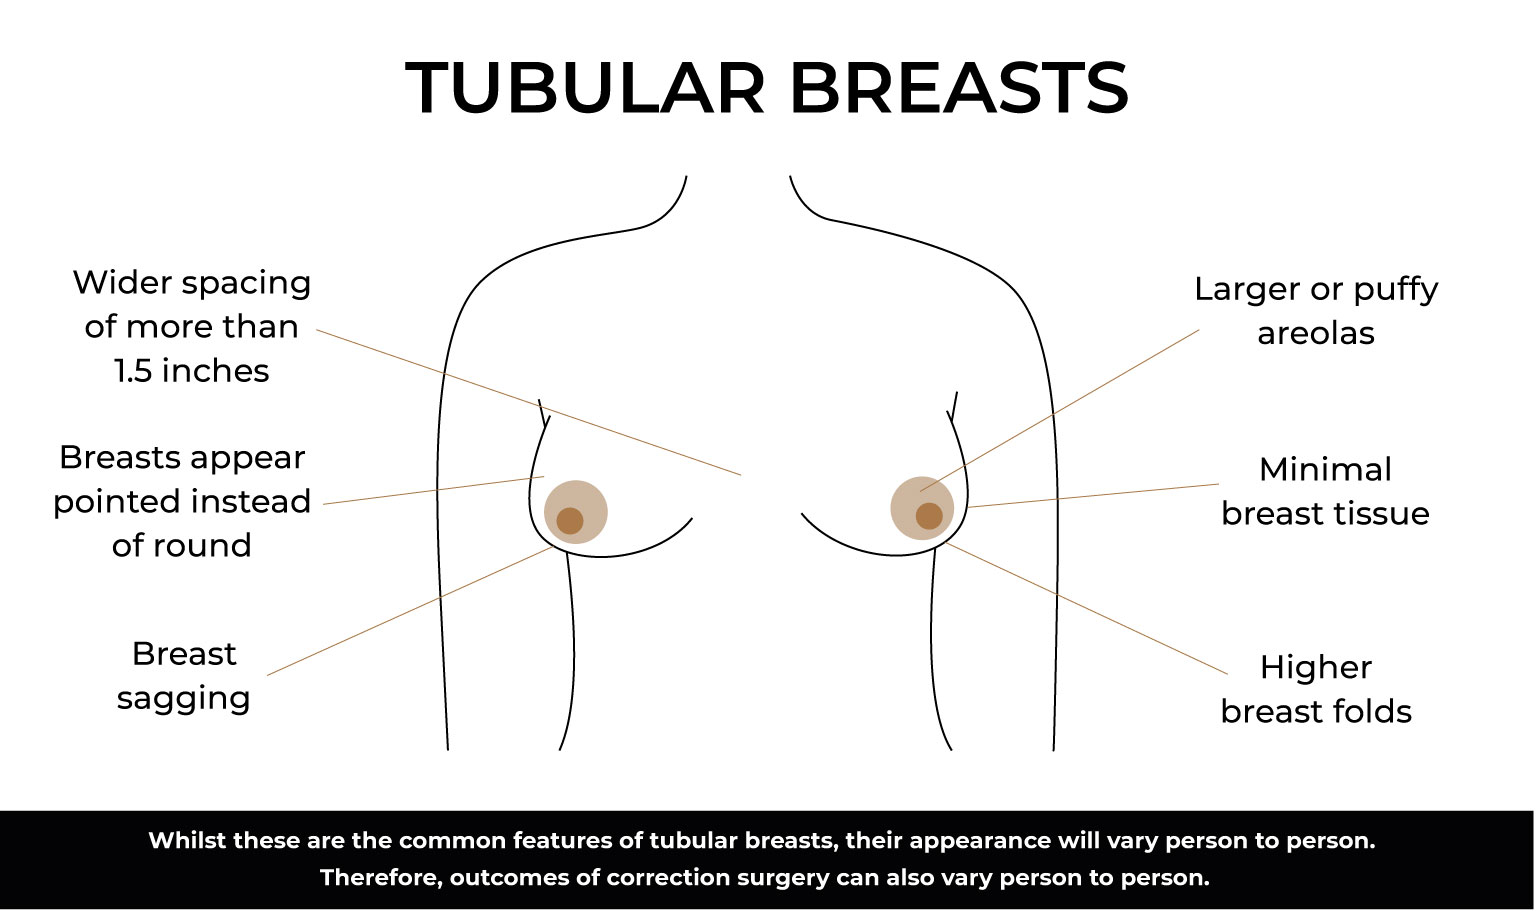 Dr Craig Layt - Tuberous breasts are a congenital abnormality of the breasts  and can be characterised by breasts that appear more conical in shape, as  opposed to round. While not a